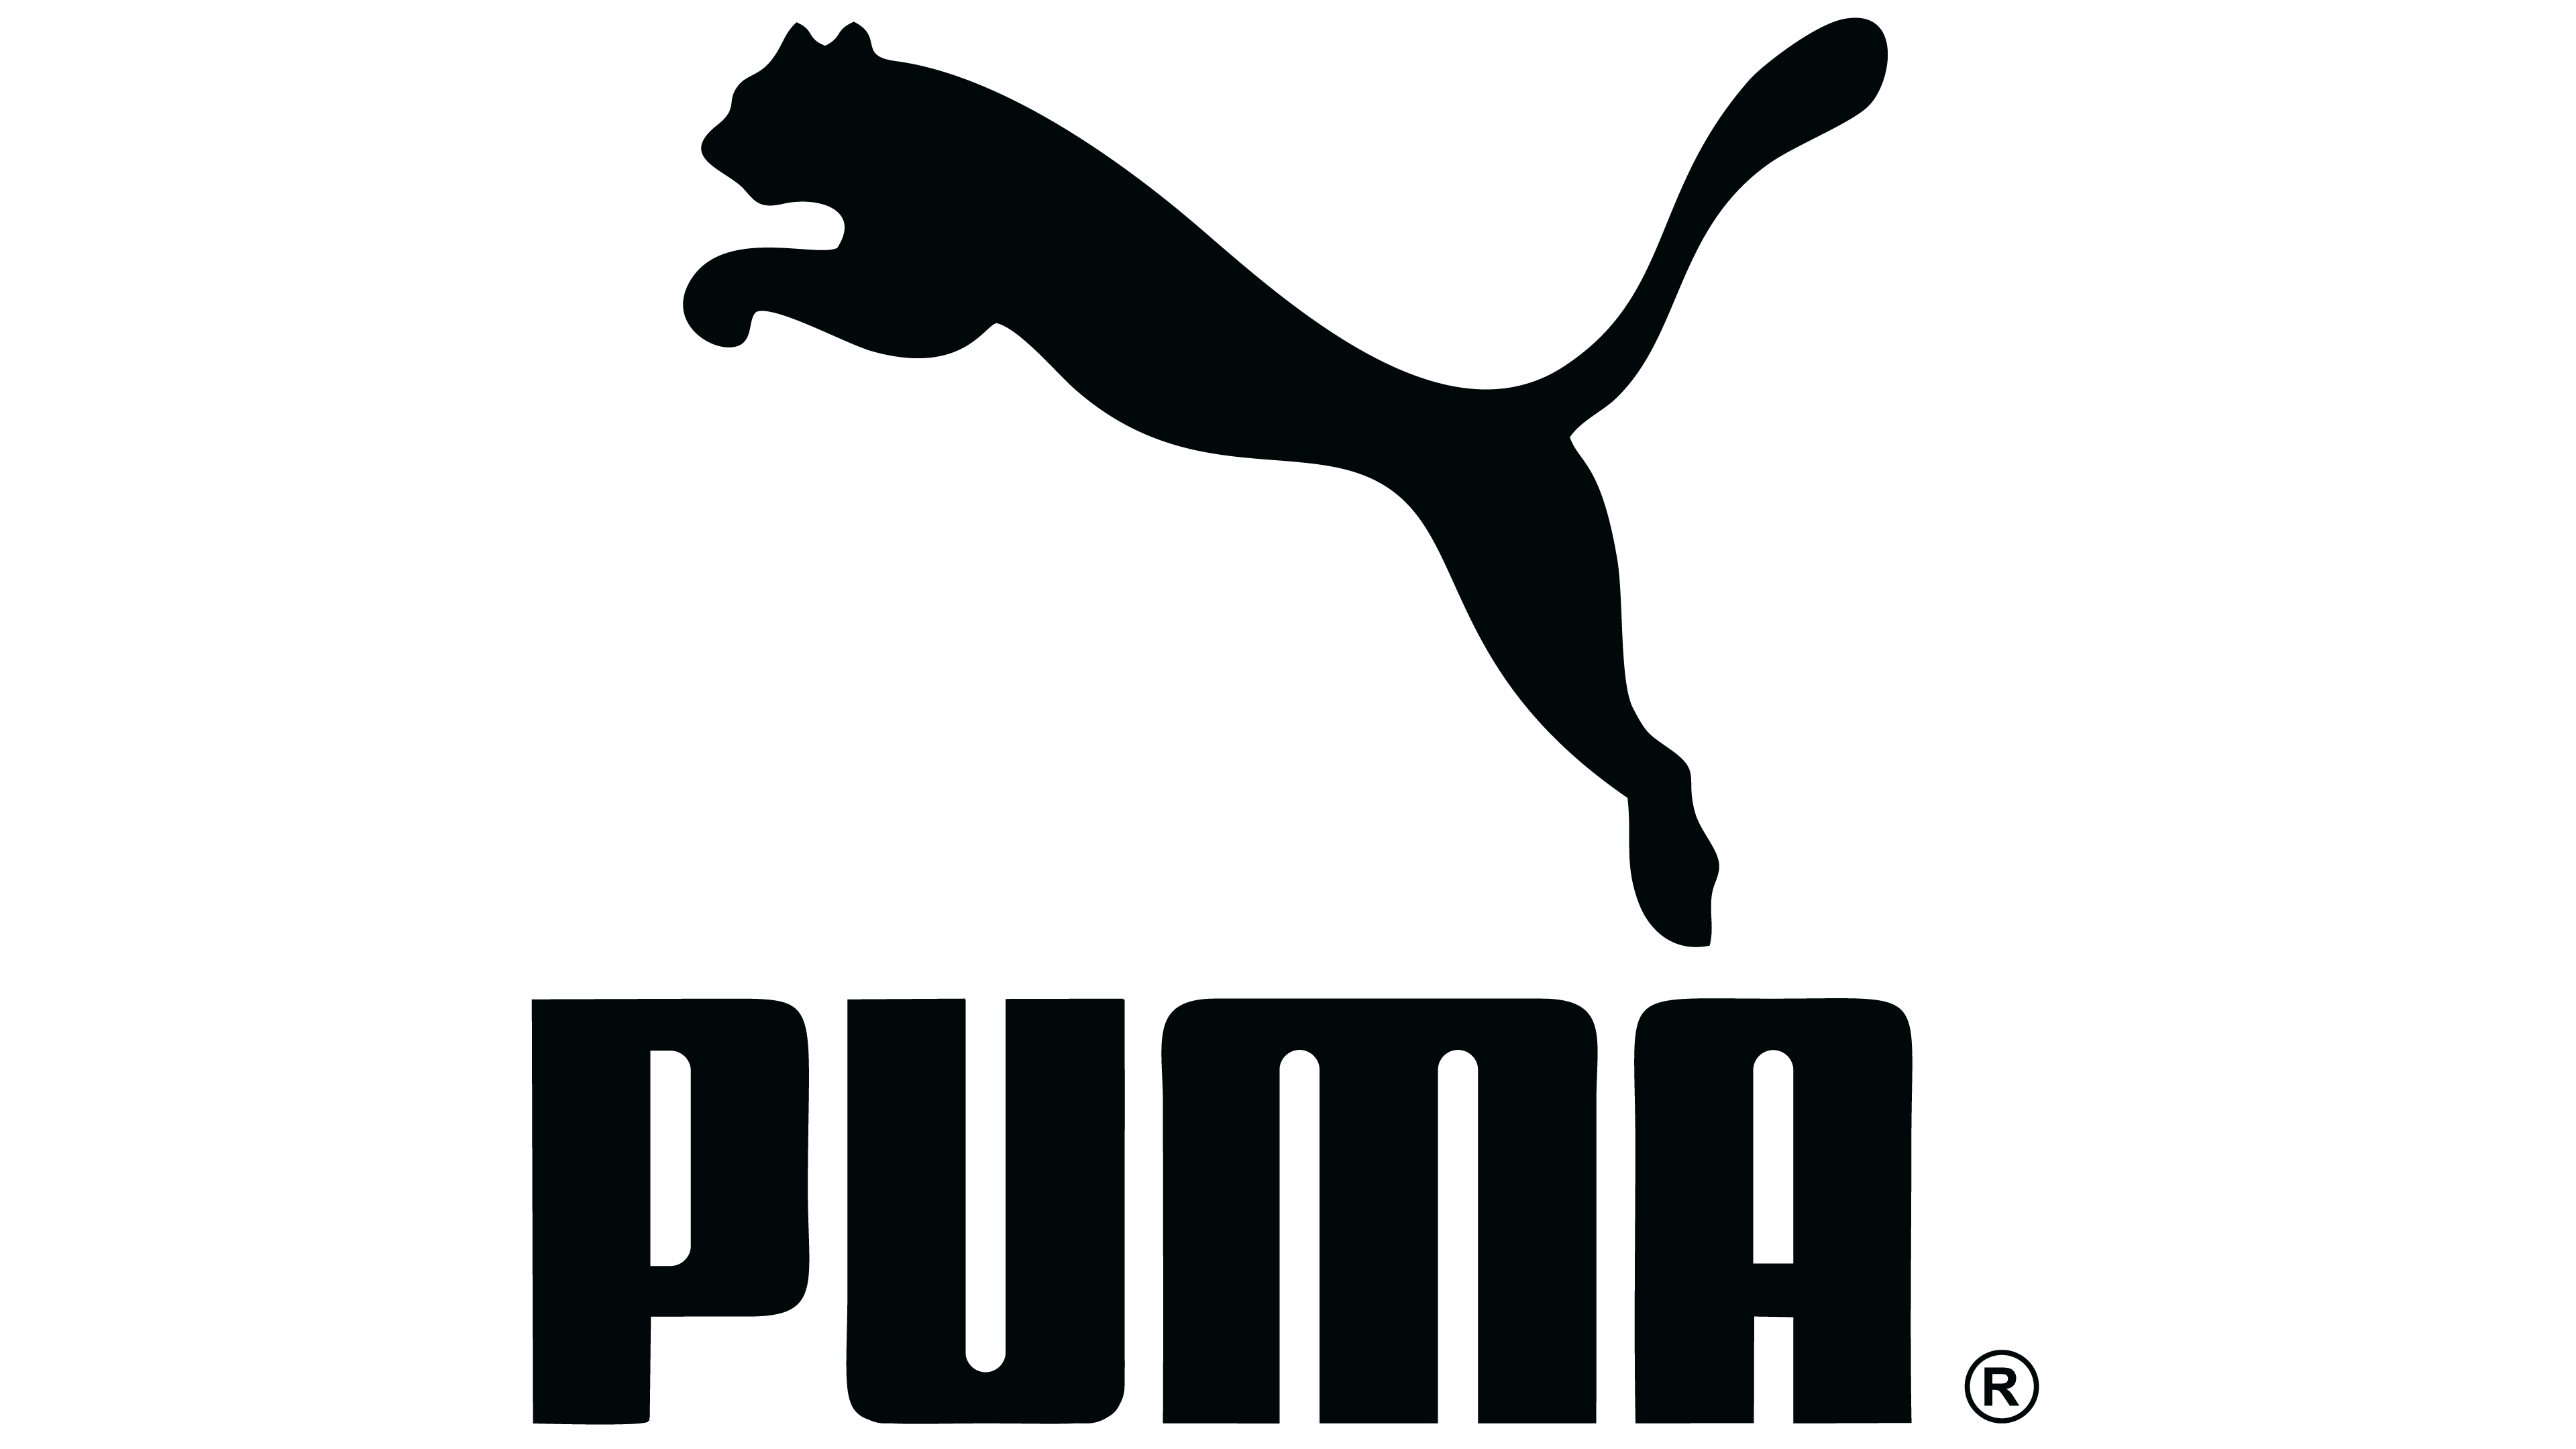 where is the puma brand from